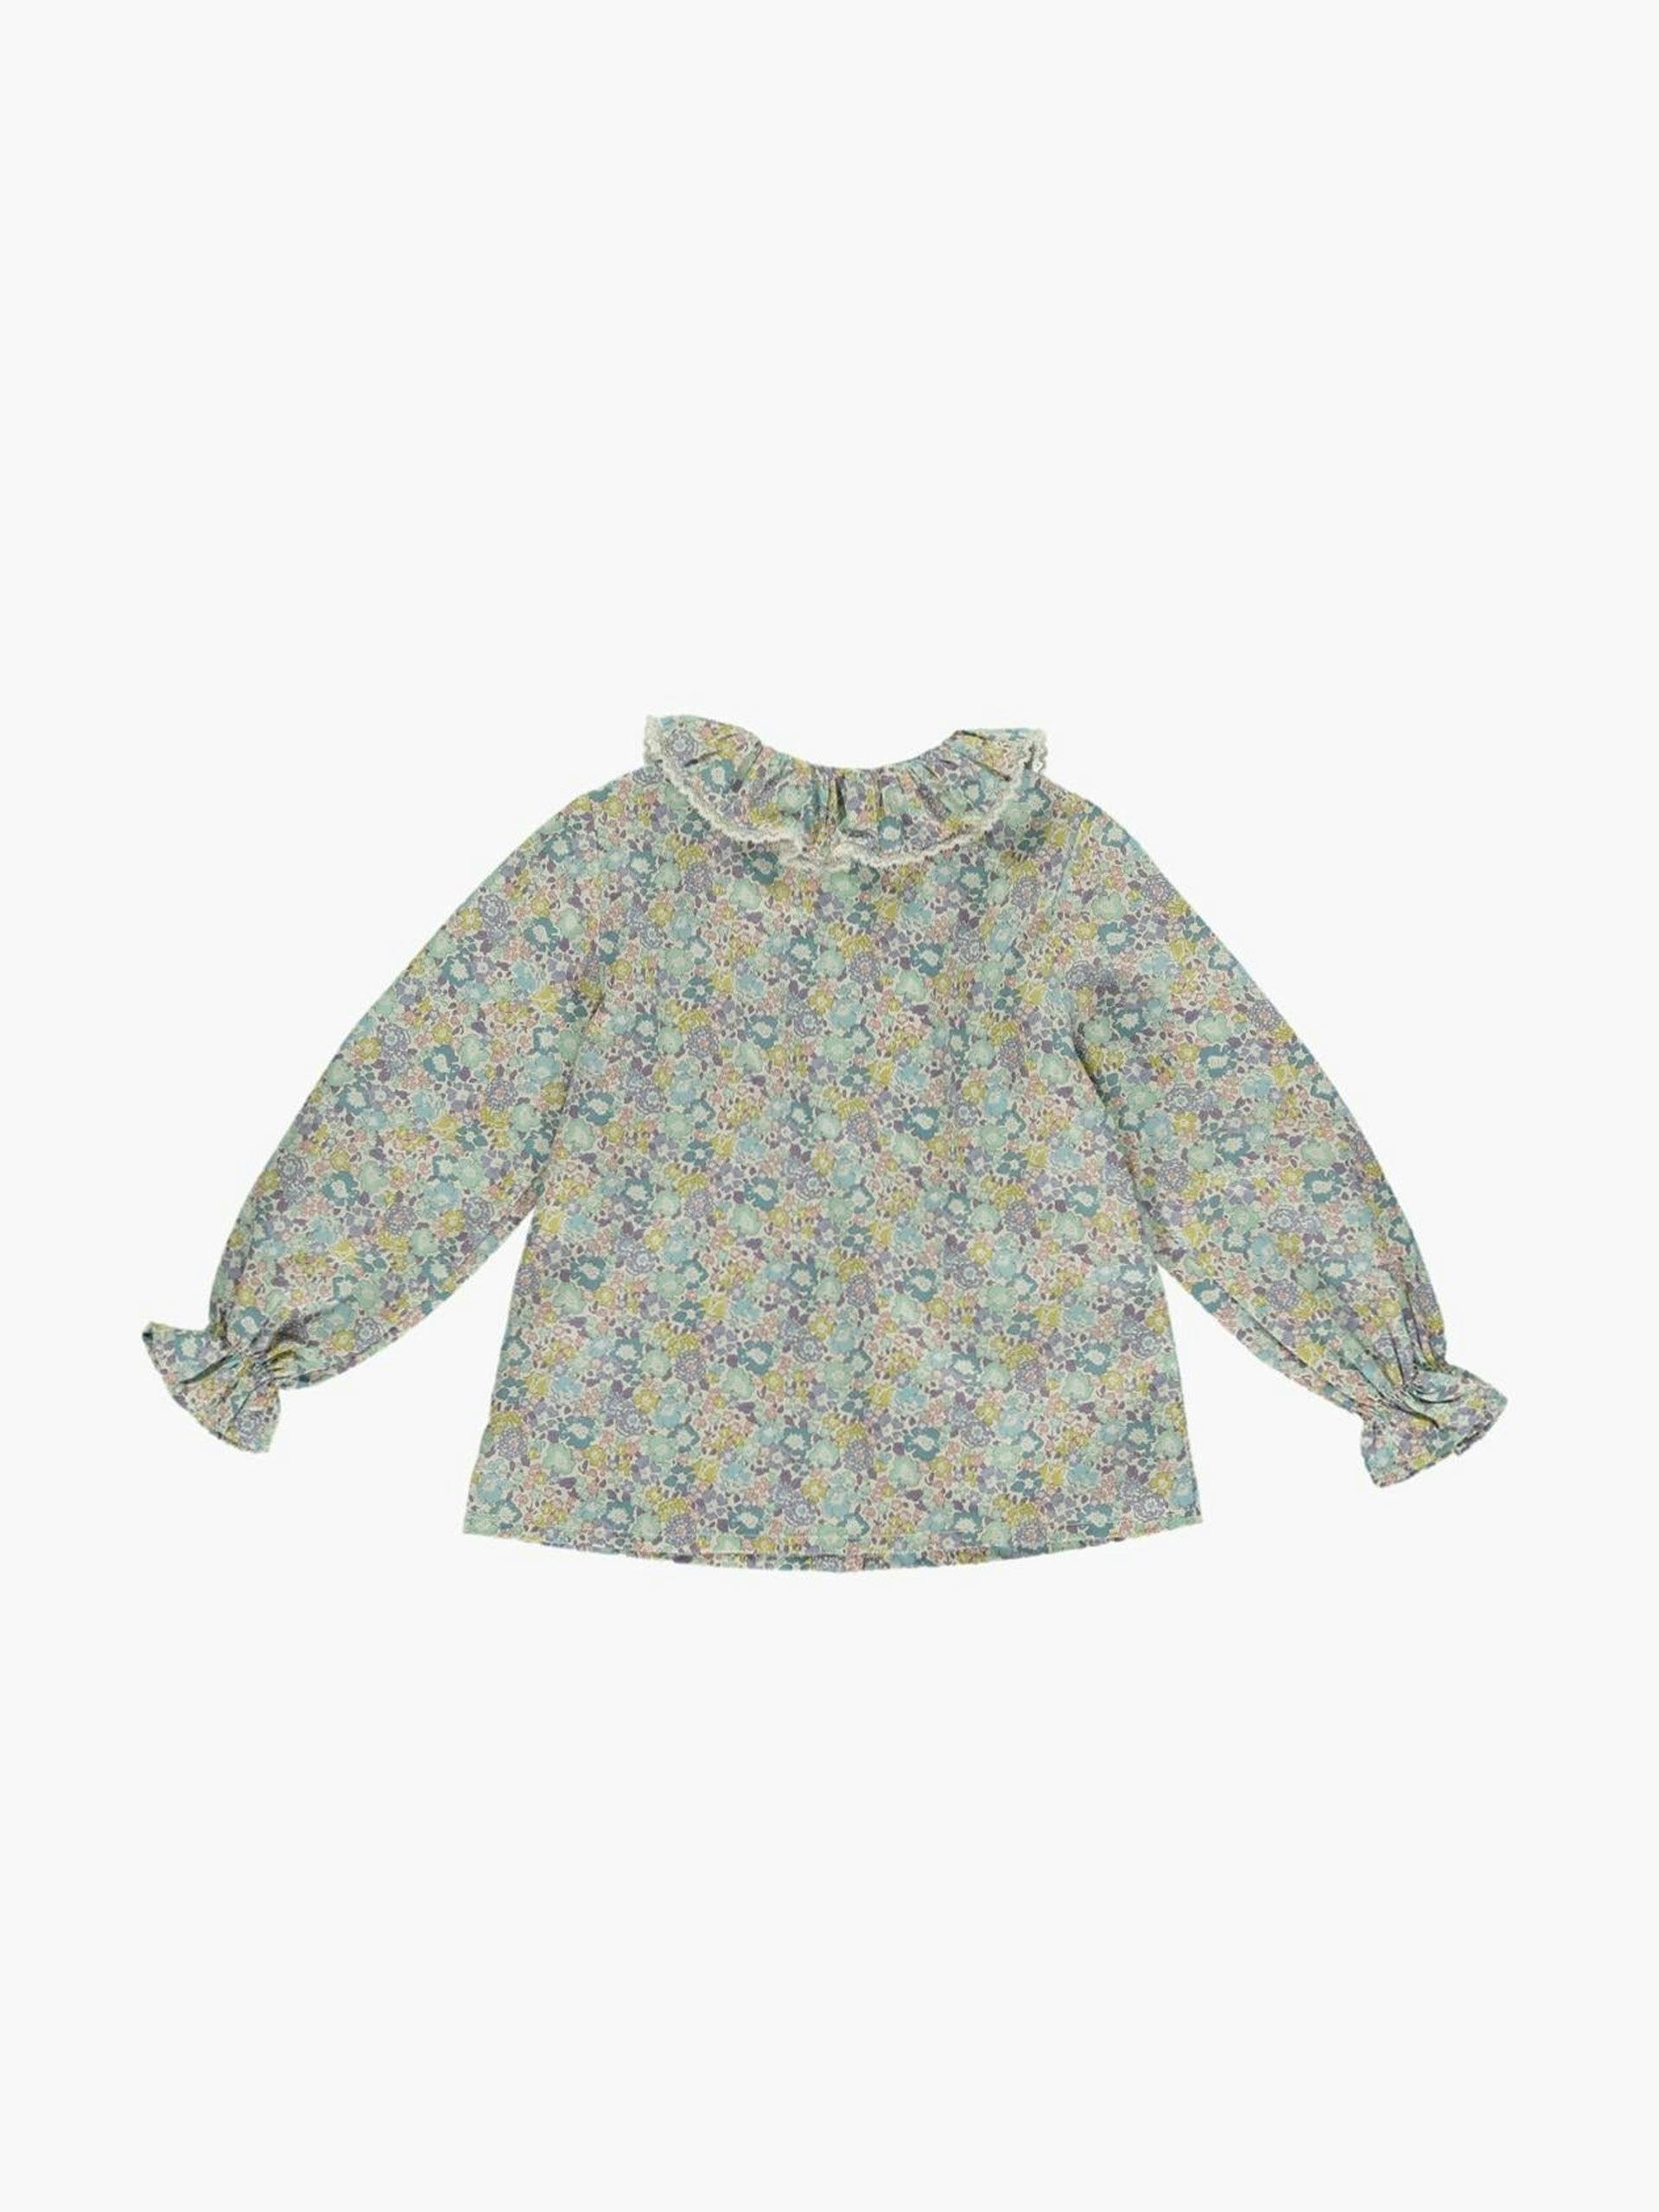 Amelia baby blouse in liberty print fabric